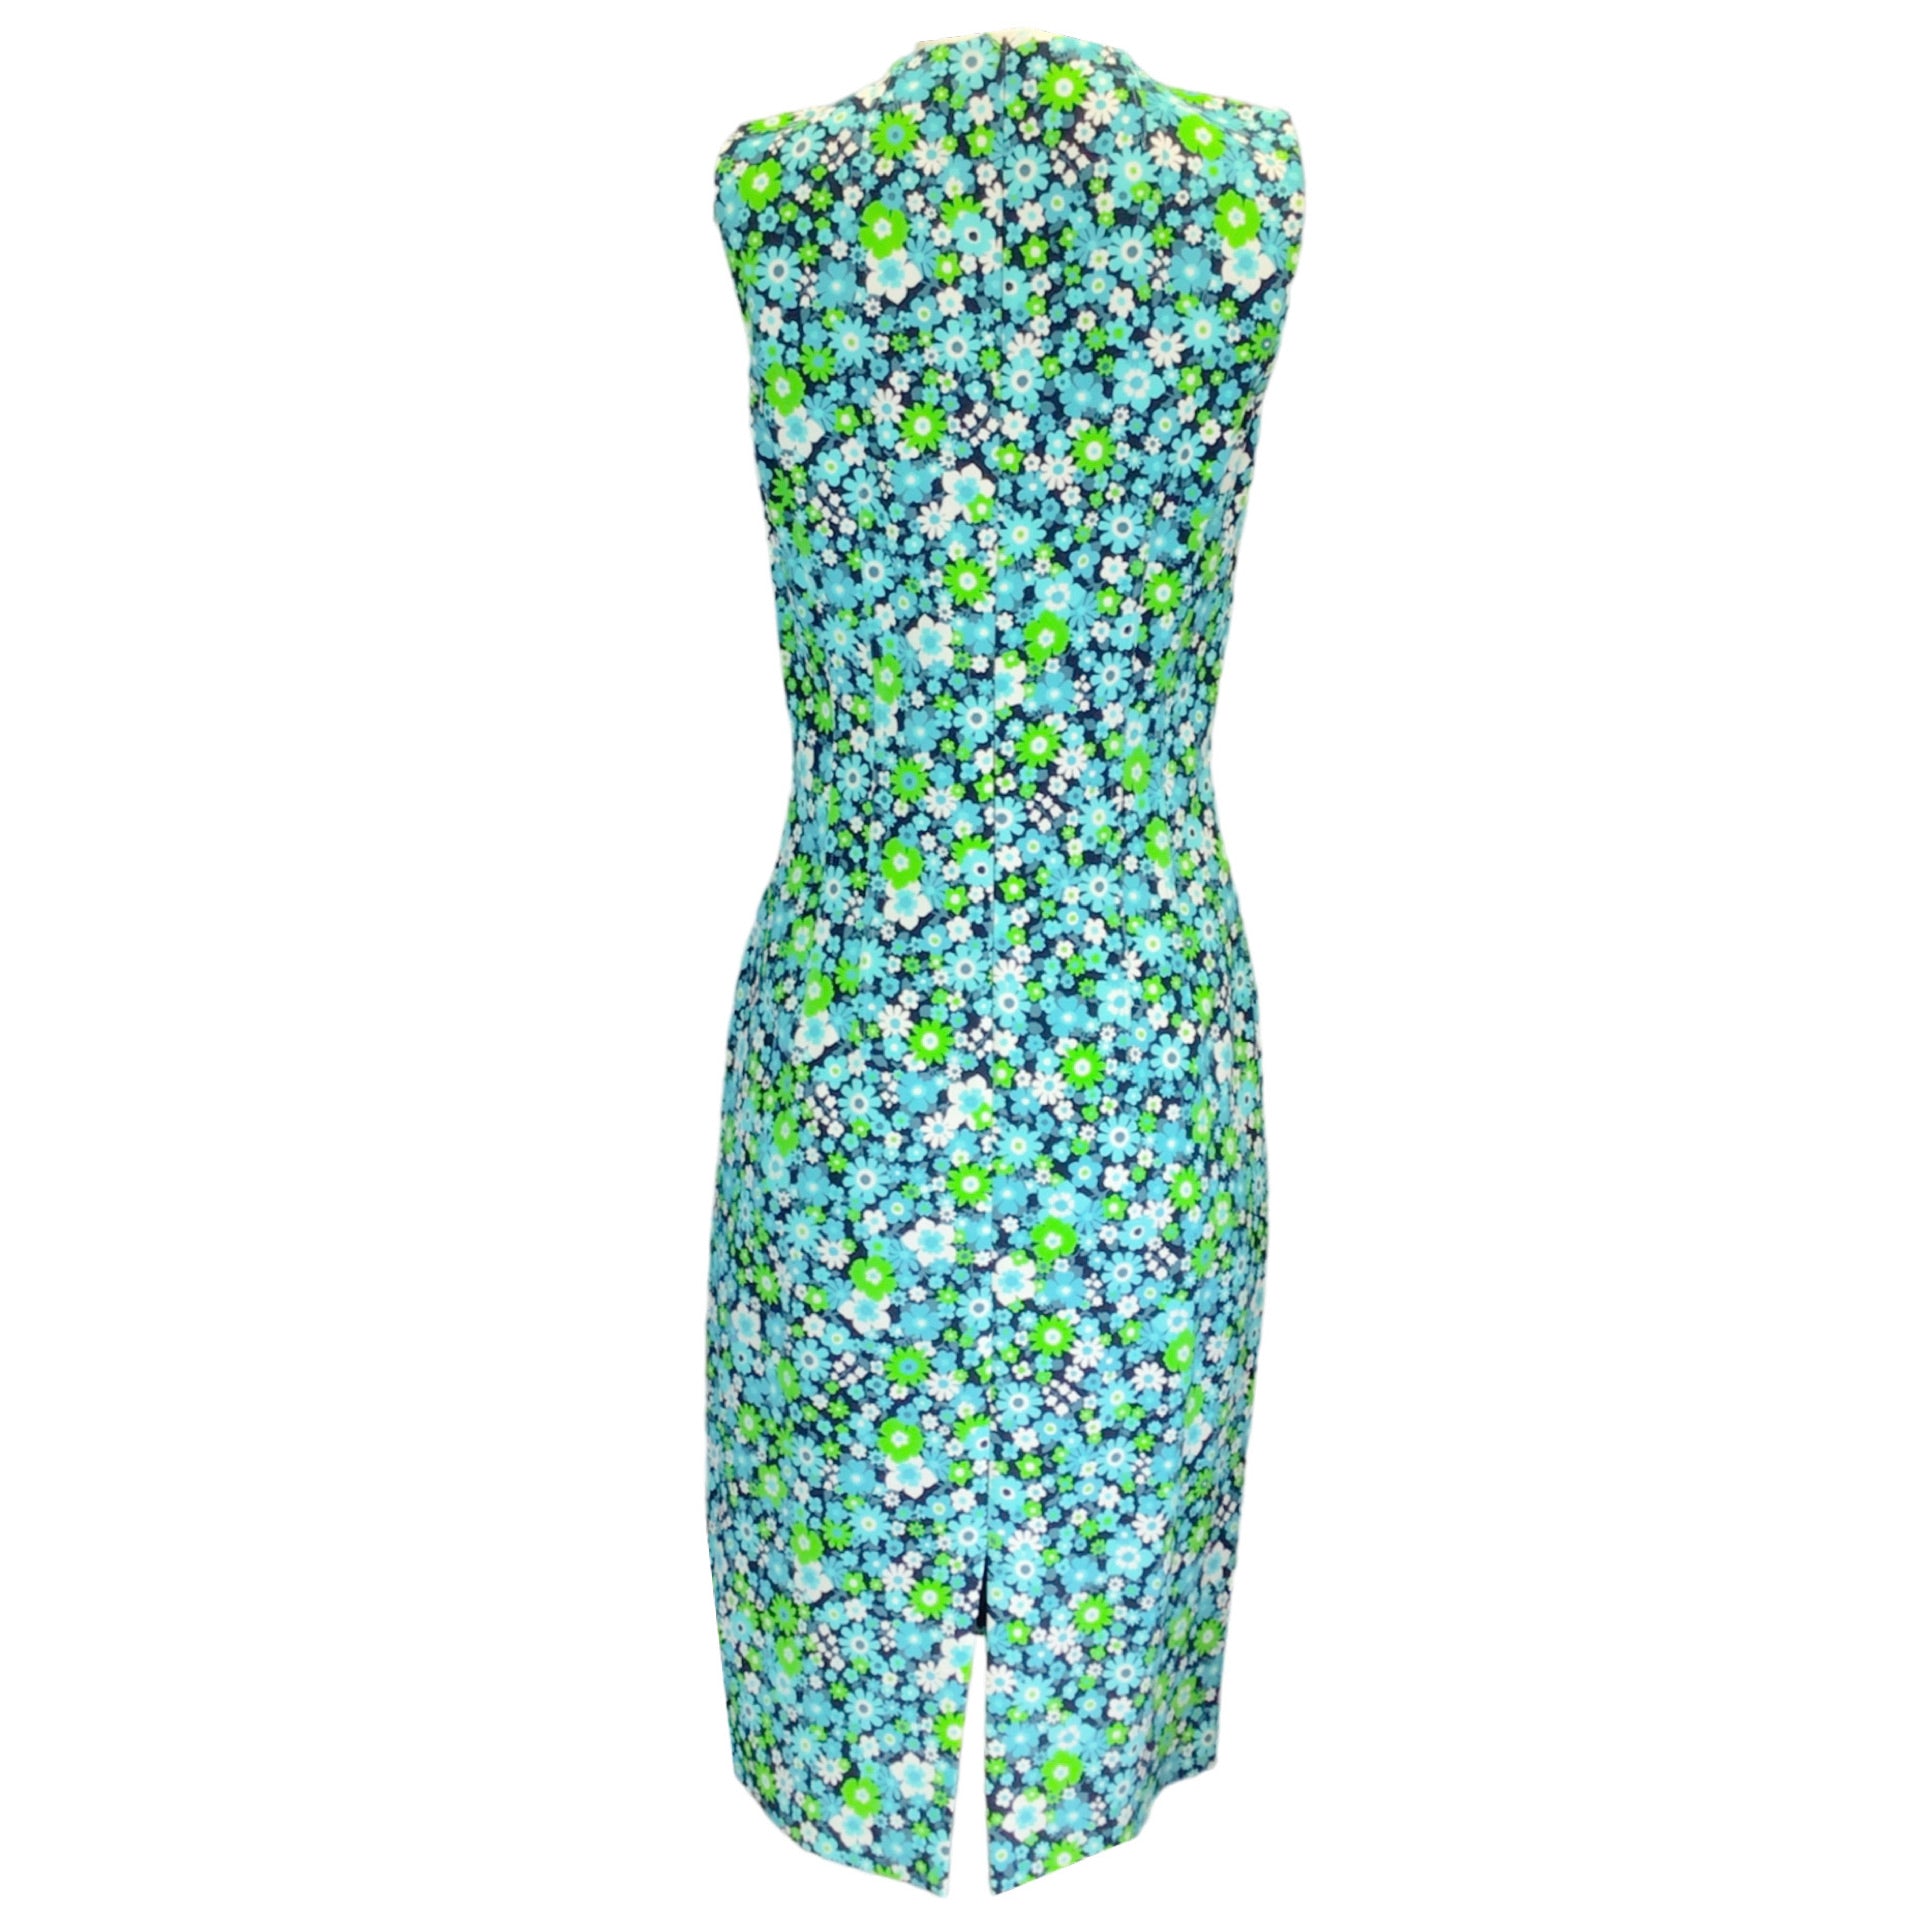 Michael Kors Collection Blue / White / Green Floral Printed Sleeveless Midi Dress